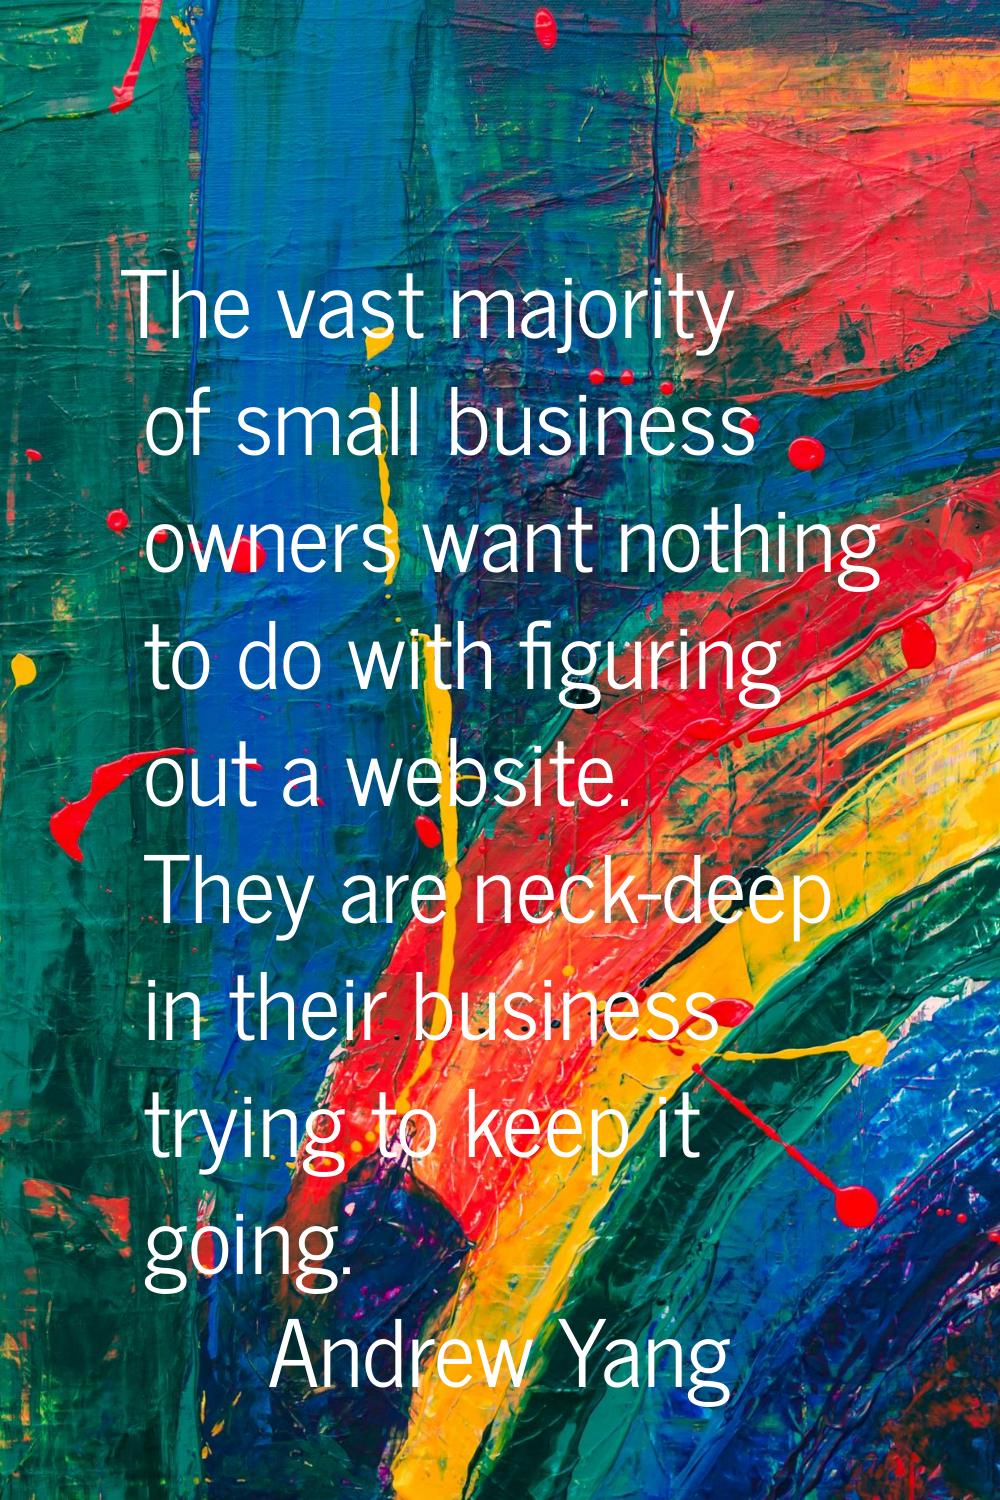 The vast majority of small business owners want nothing to do with figuring out a website. They are